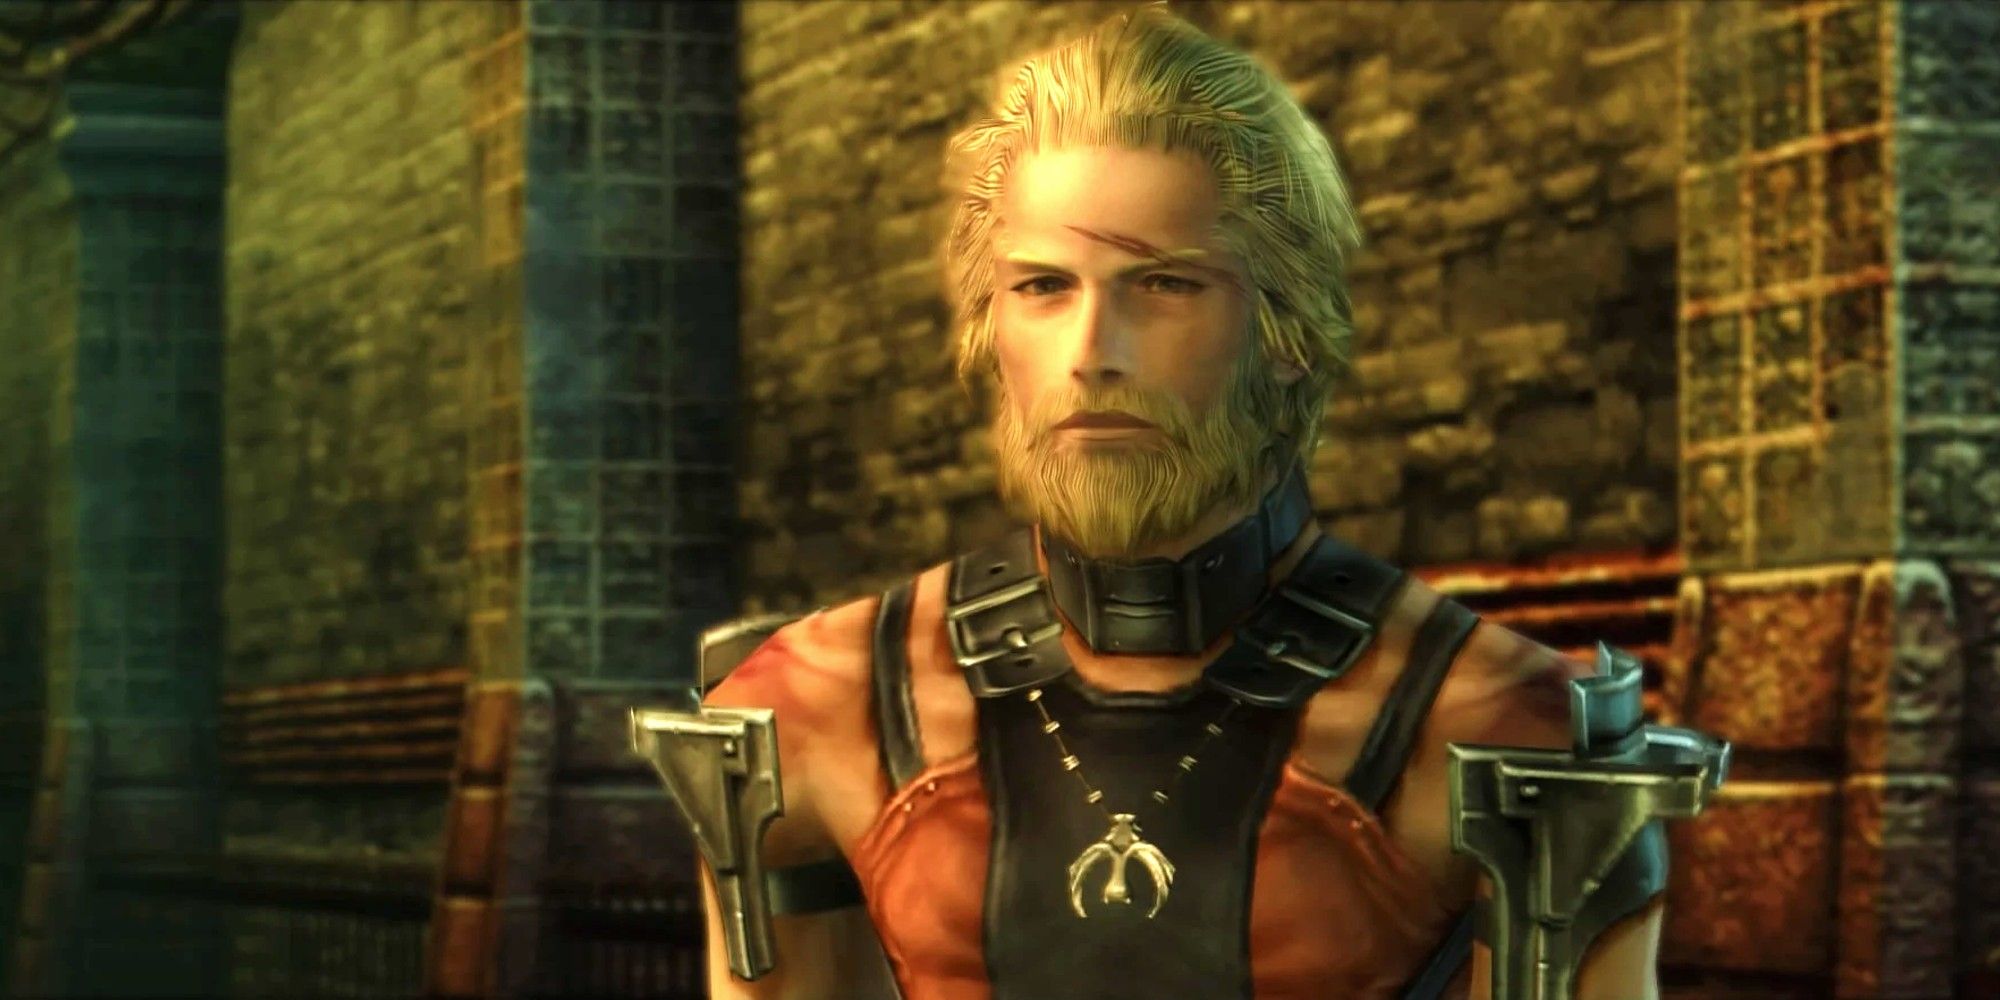 Basch stands in a brick hallway with a scar on his face